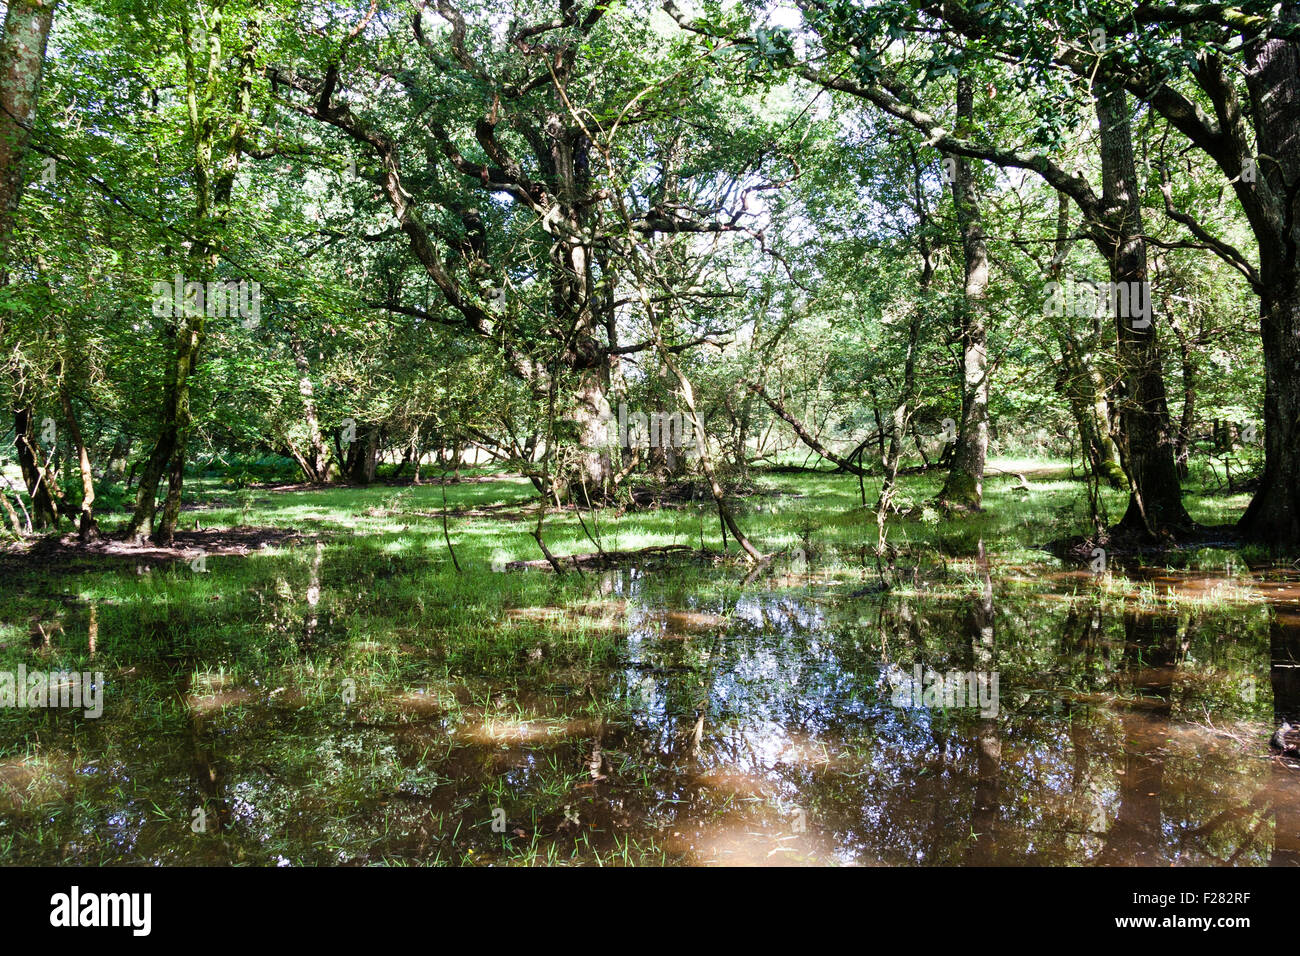 England, New Forest. Marshy Wood Grove. Swampland, marsh type landscape, trees growing in water flooded glade, sunlight filtering through. Stock Photo